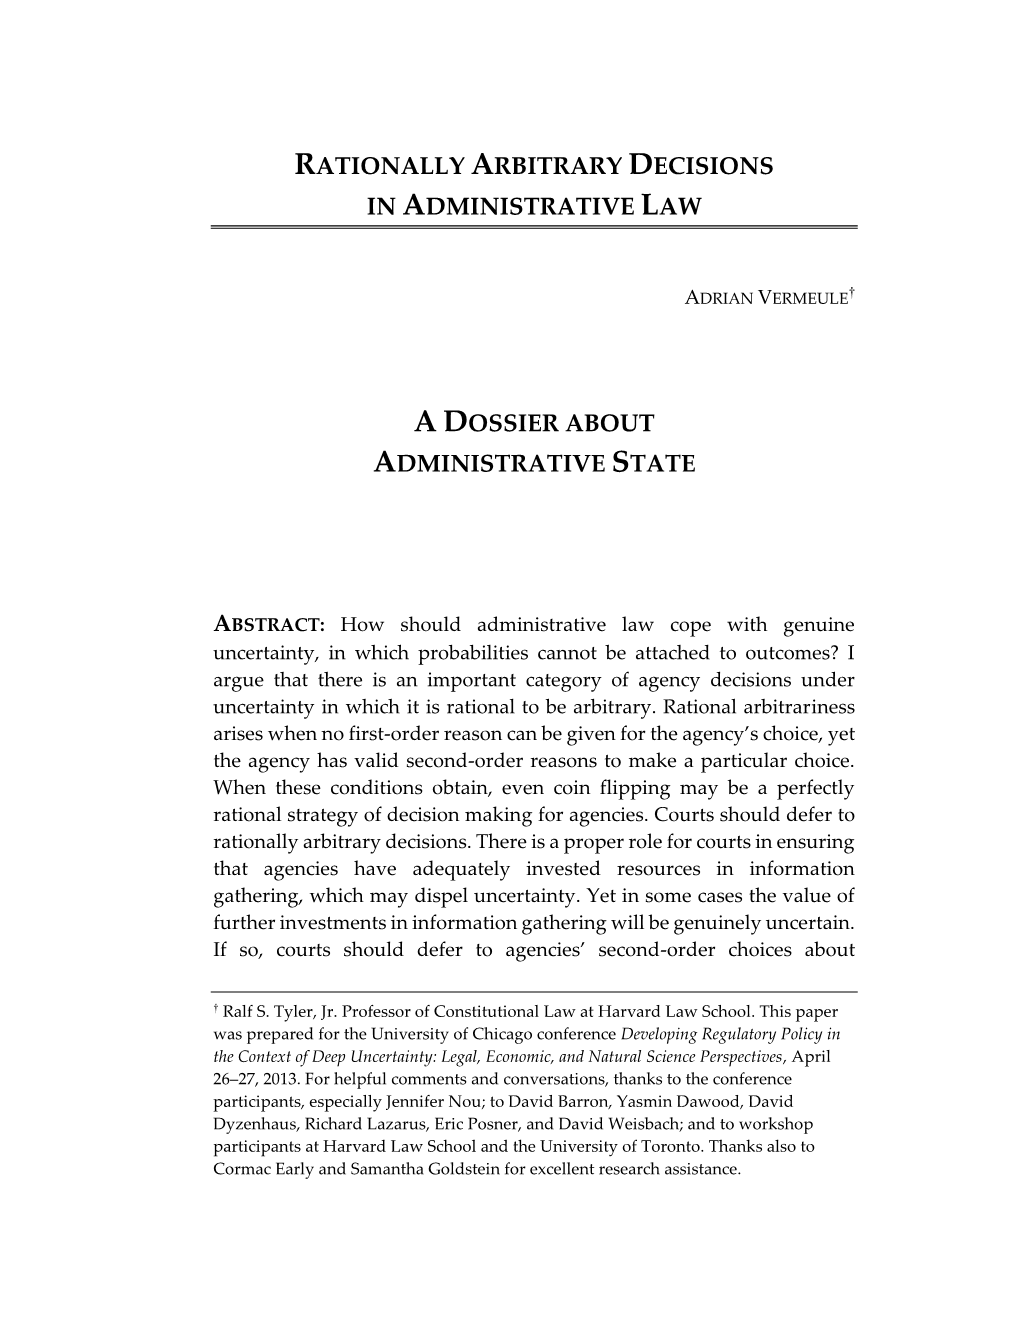 Rationally Arbitrary Decisions in Administrative Law